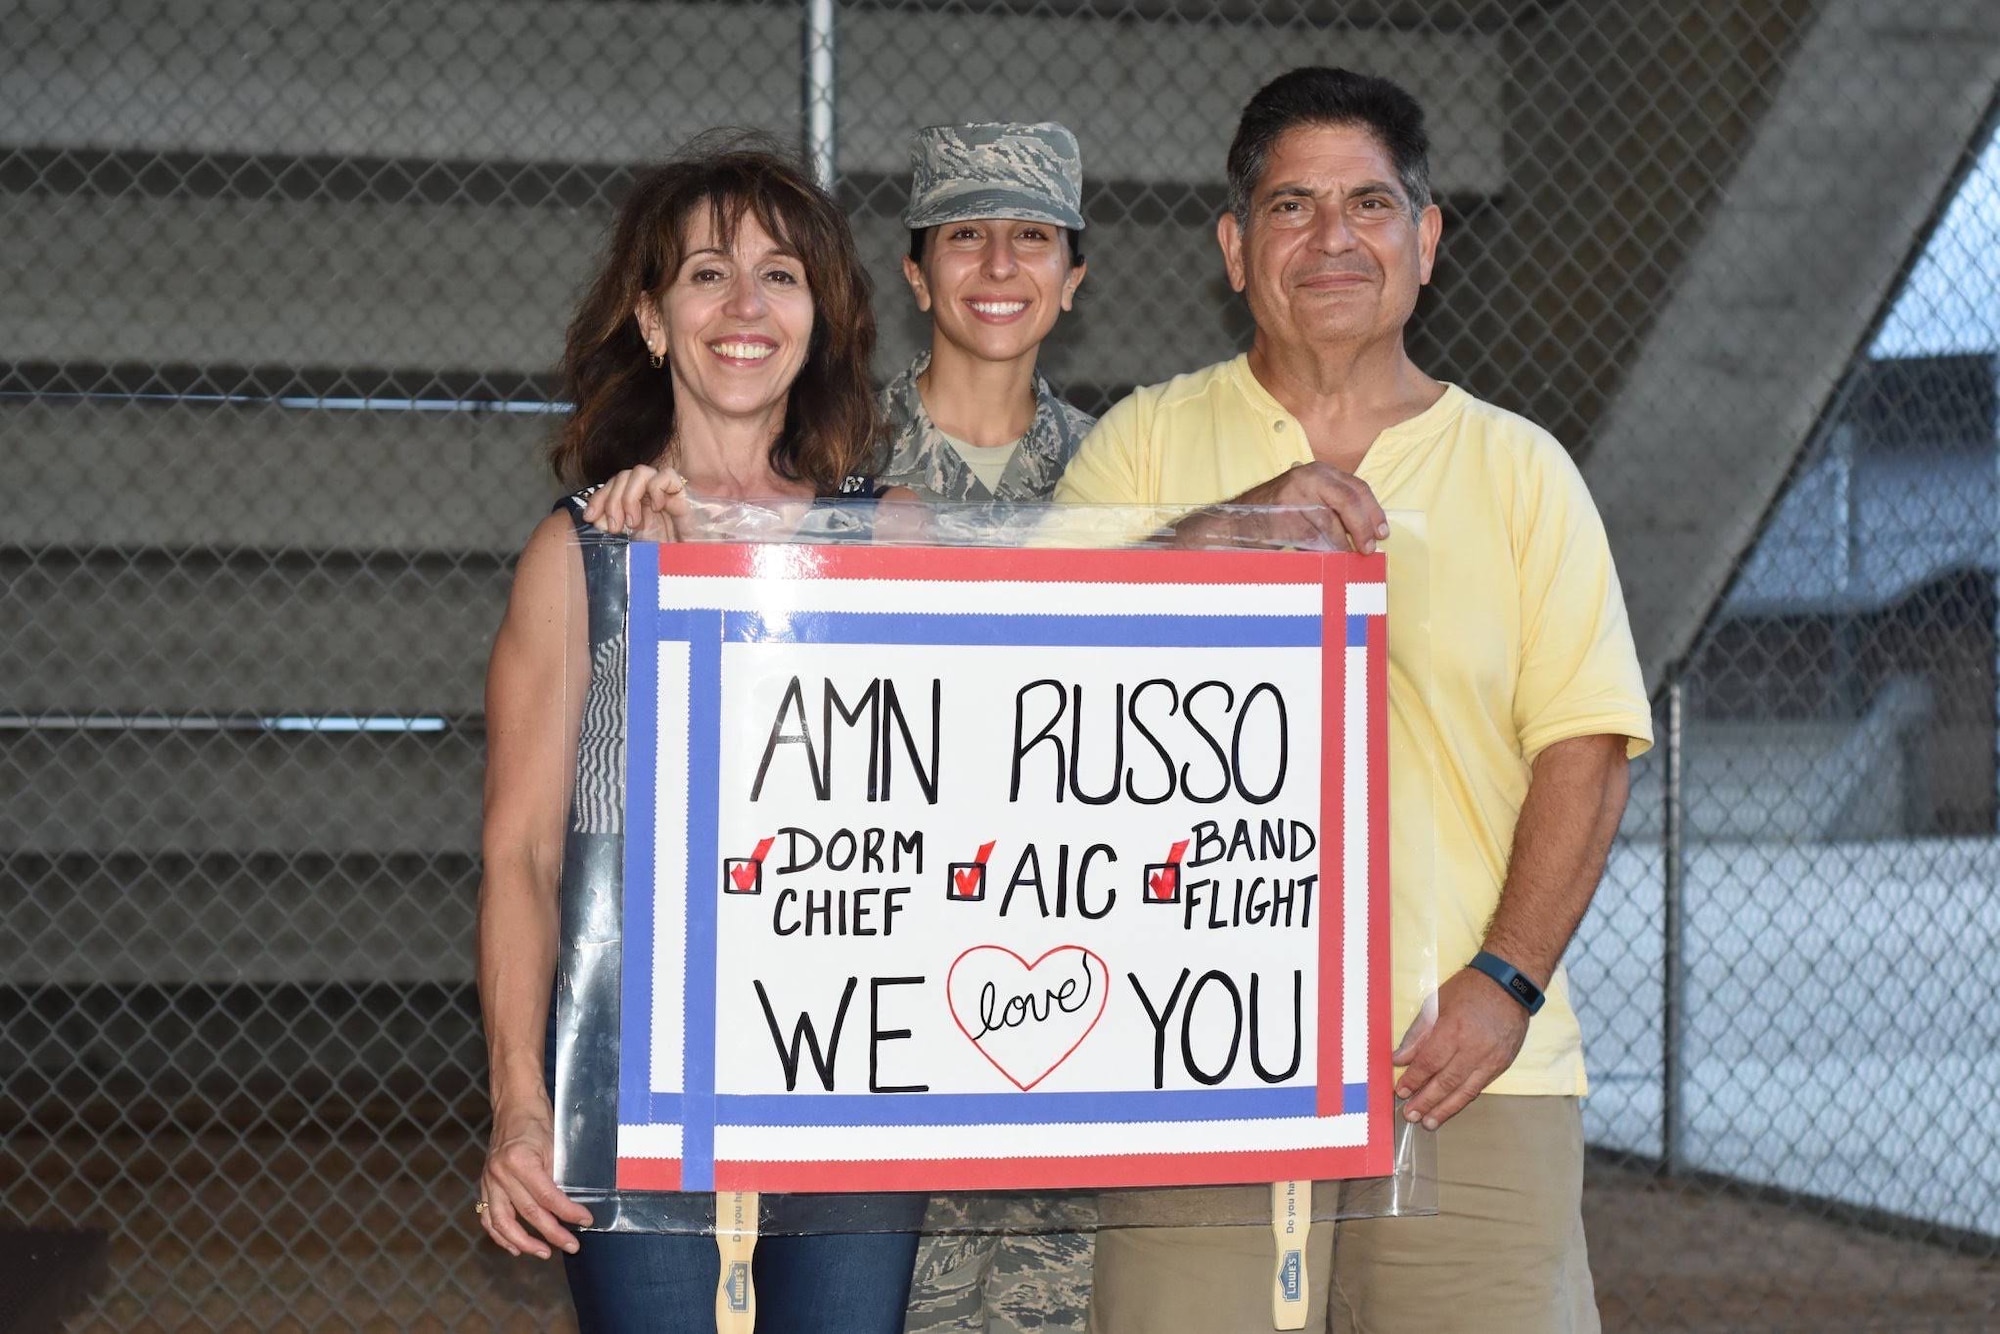 Airman 1st Class Christina Russo, a Basic Military Training graduate, poses for a photo with her parents, Carmen and Anna Marie Russo, after BMT graduation on Sept. 20, 2018, at Joint Base San Antonio-Lackland Air Force Base. Both of Russo’s parents served in the Air Force Reserve and returned to Lackland over 30 years later to watch their daughter graduate BMT.